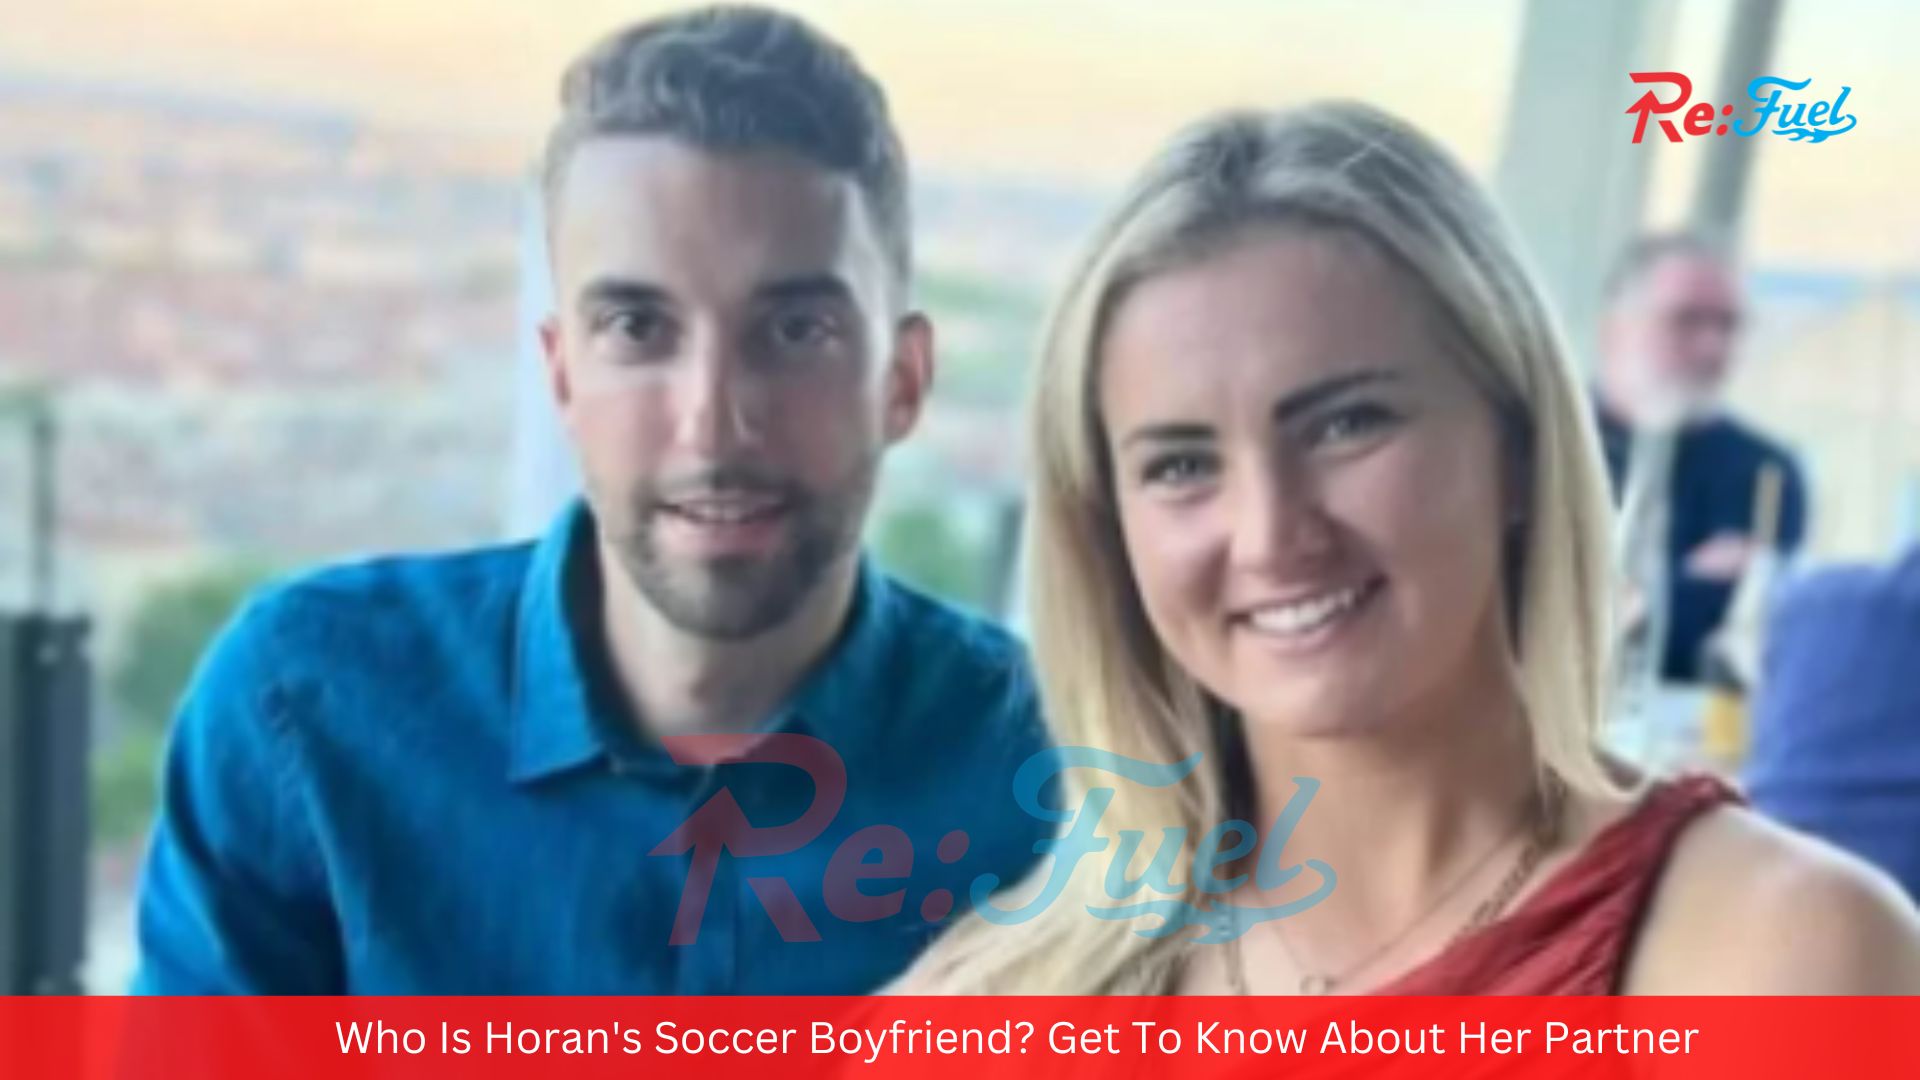 Who Is Horan's Soccer Boyfriend? Get To Know About Her Partner